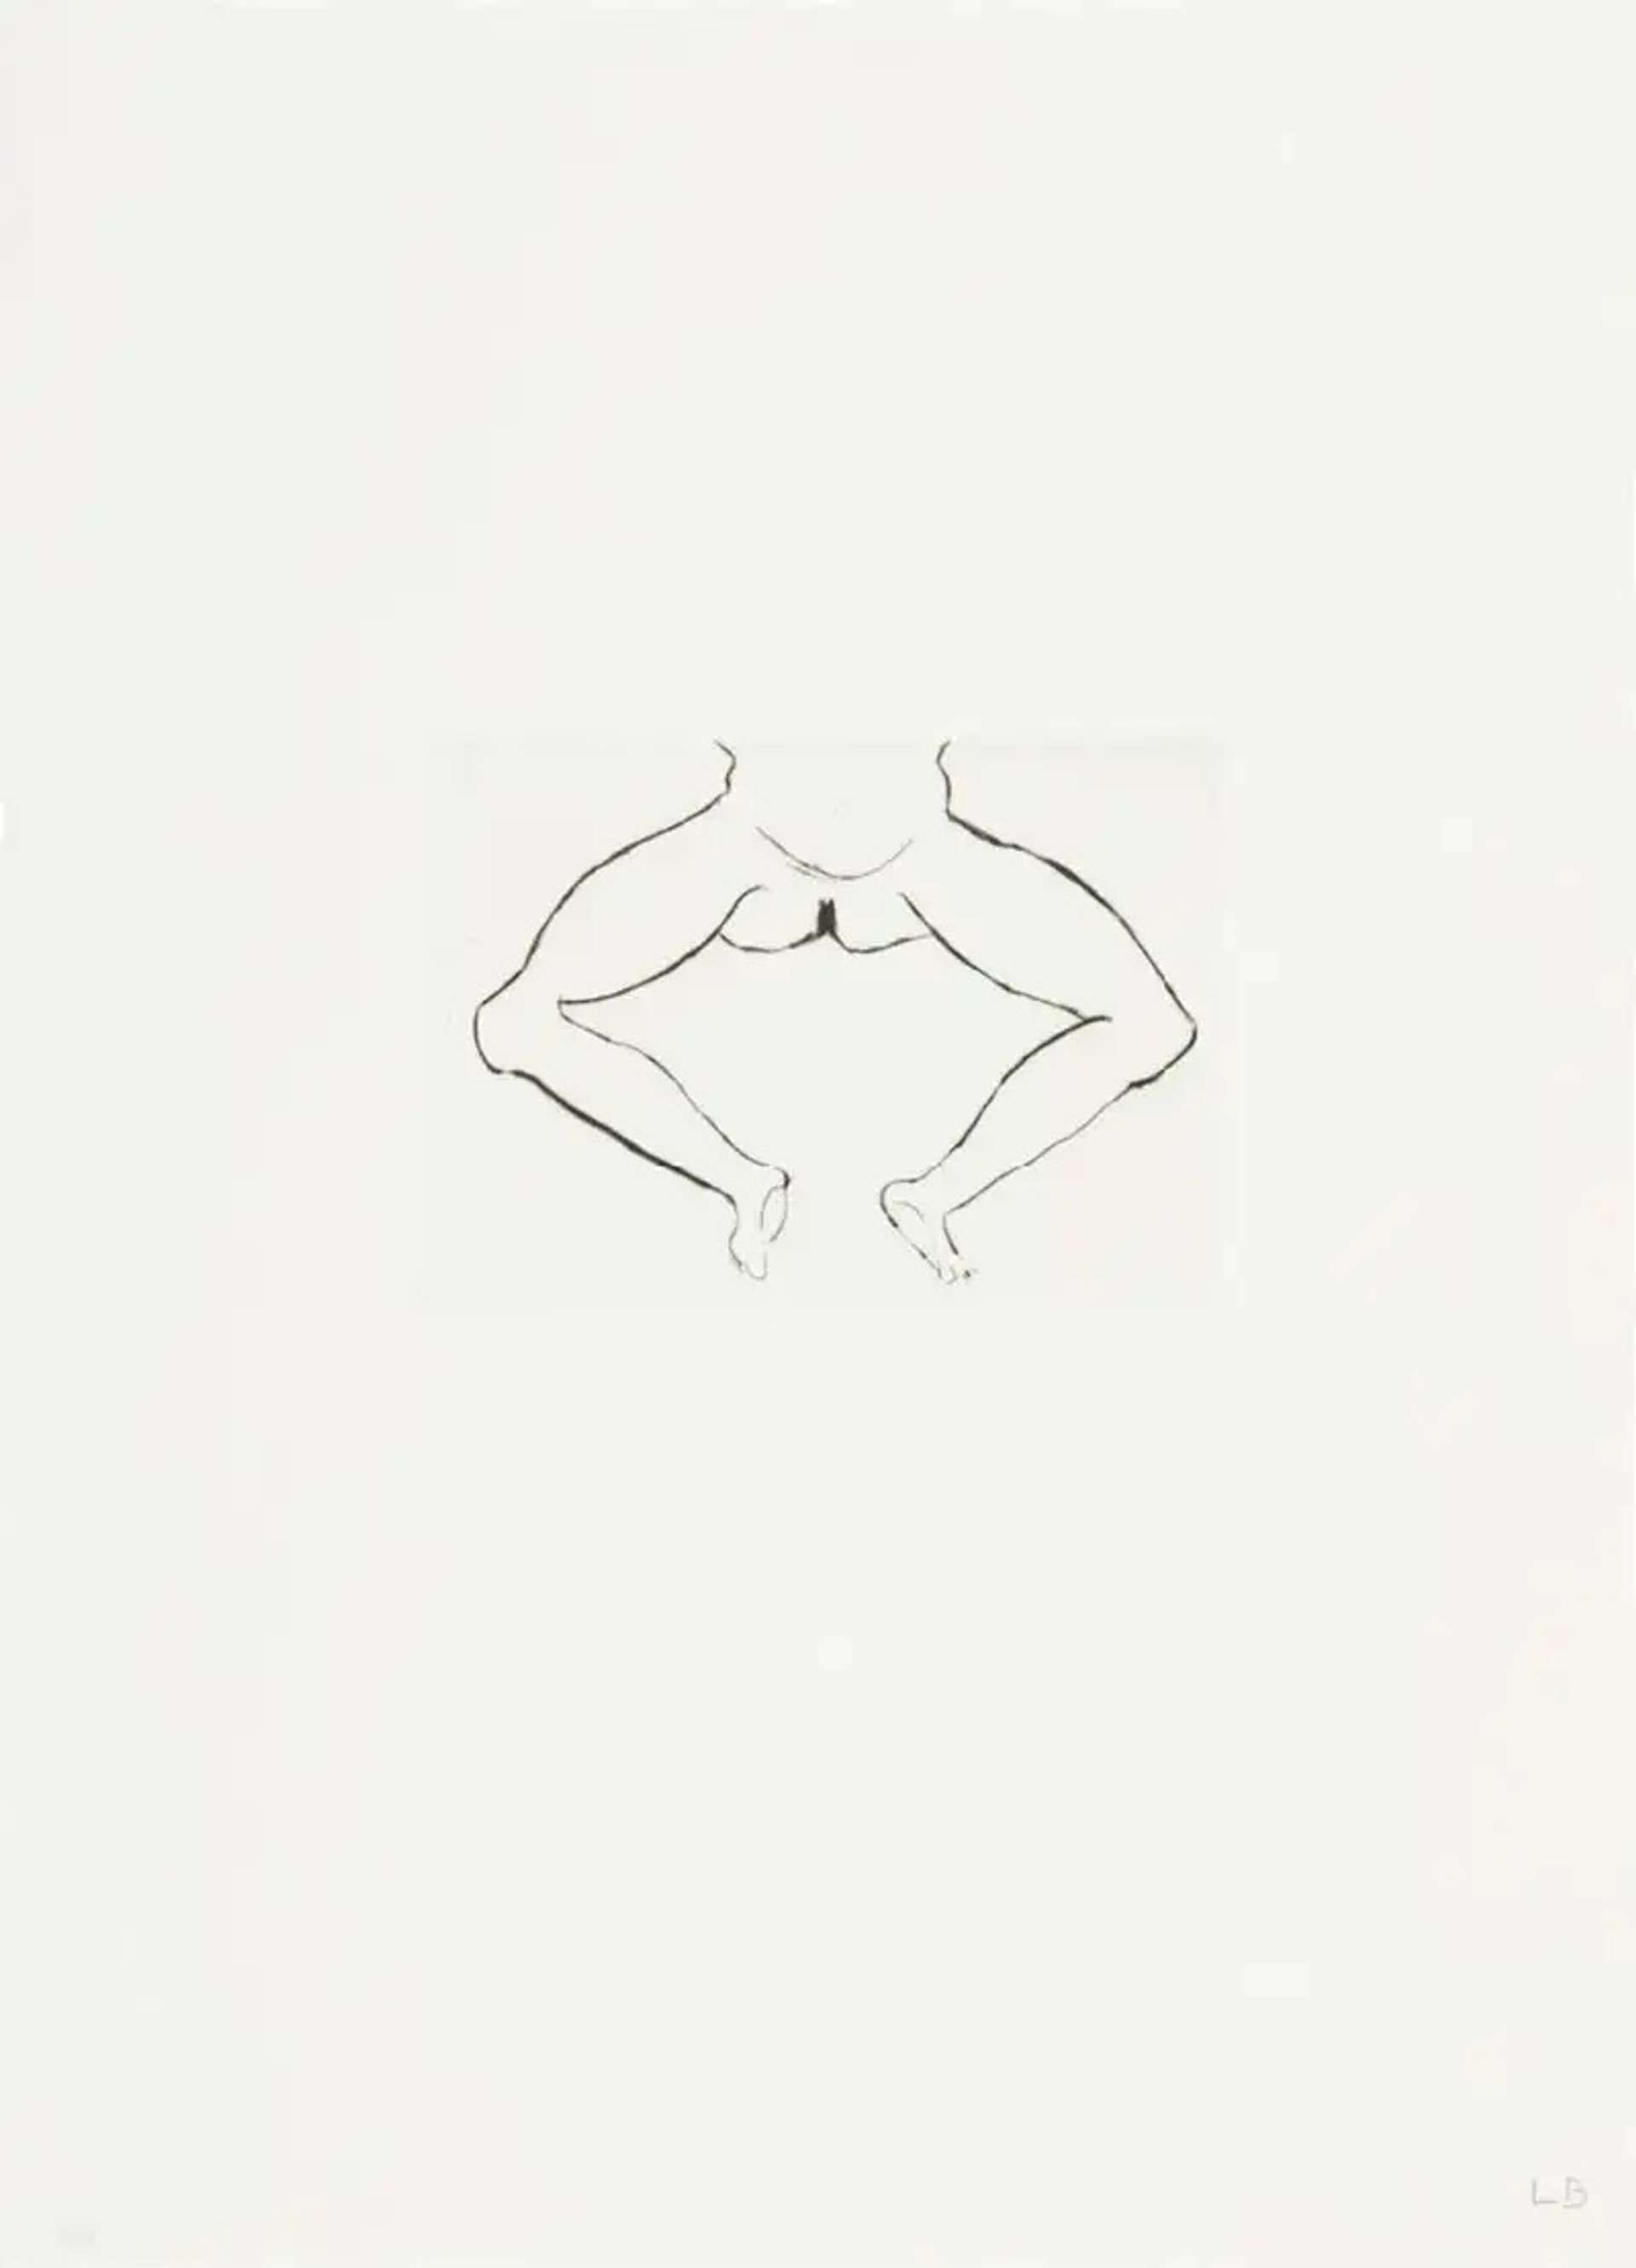 Louise Bourgeois Untitled No. 7. A monochromatic etching of a depiction of the nude lower half of a woman’s body.